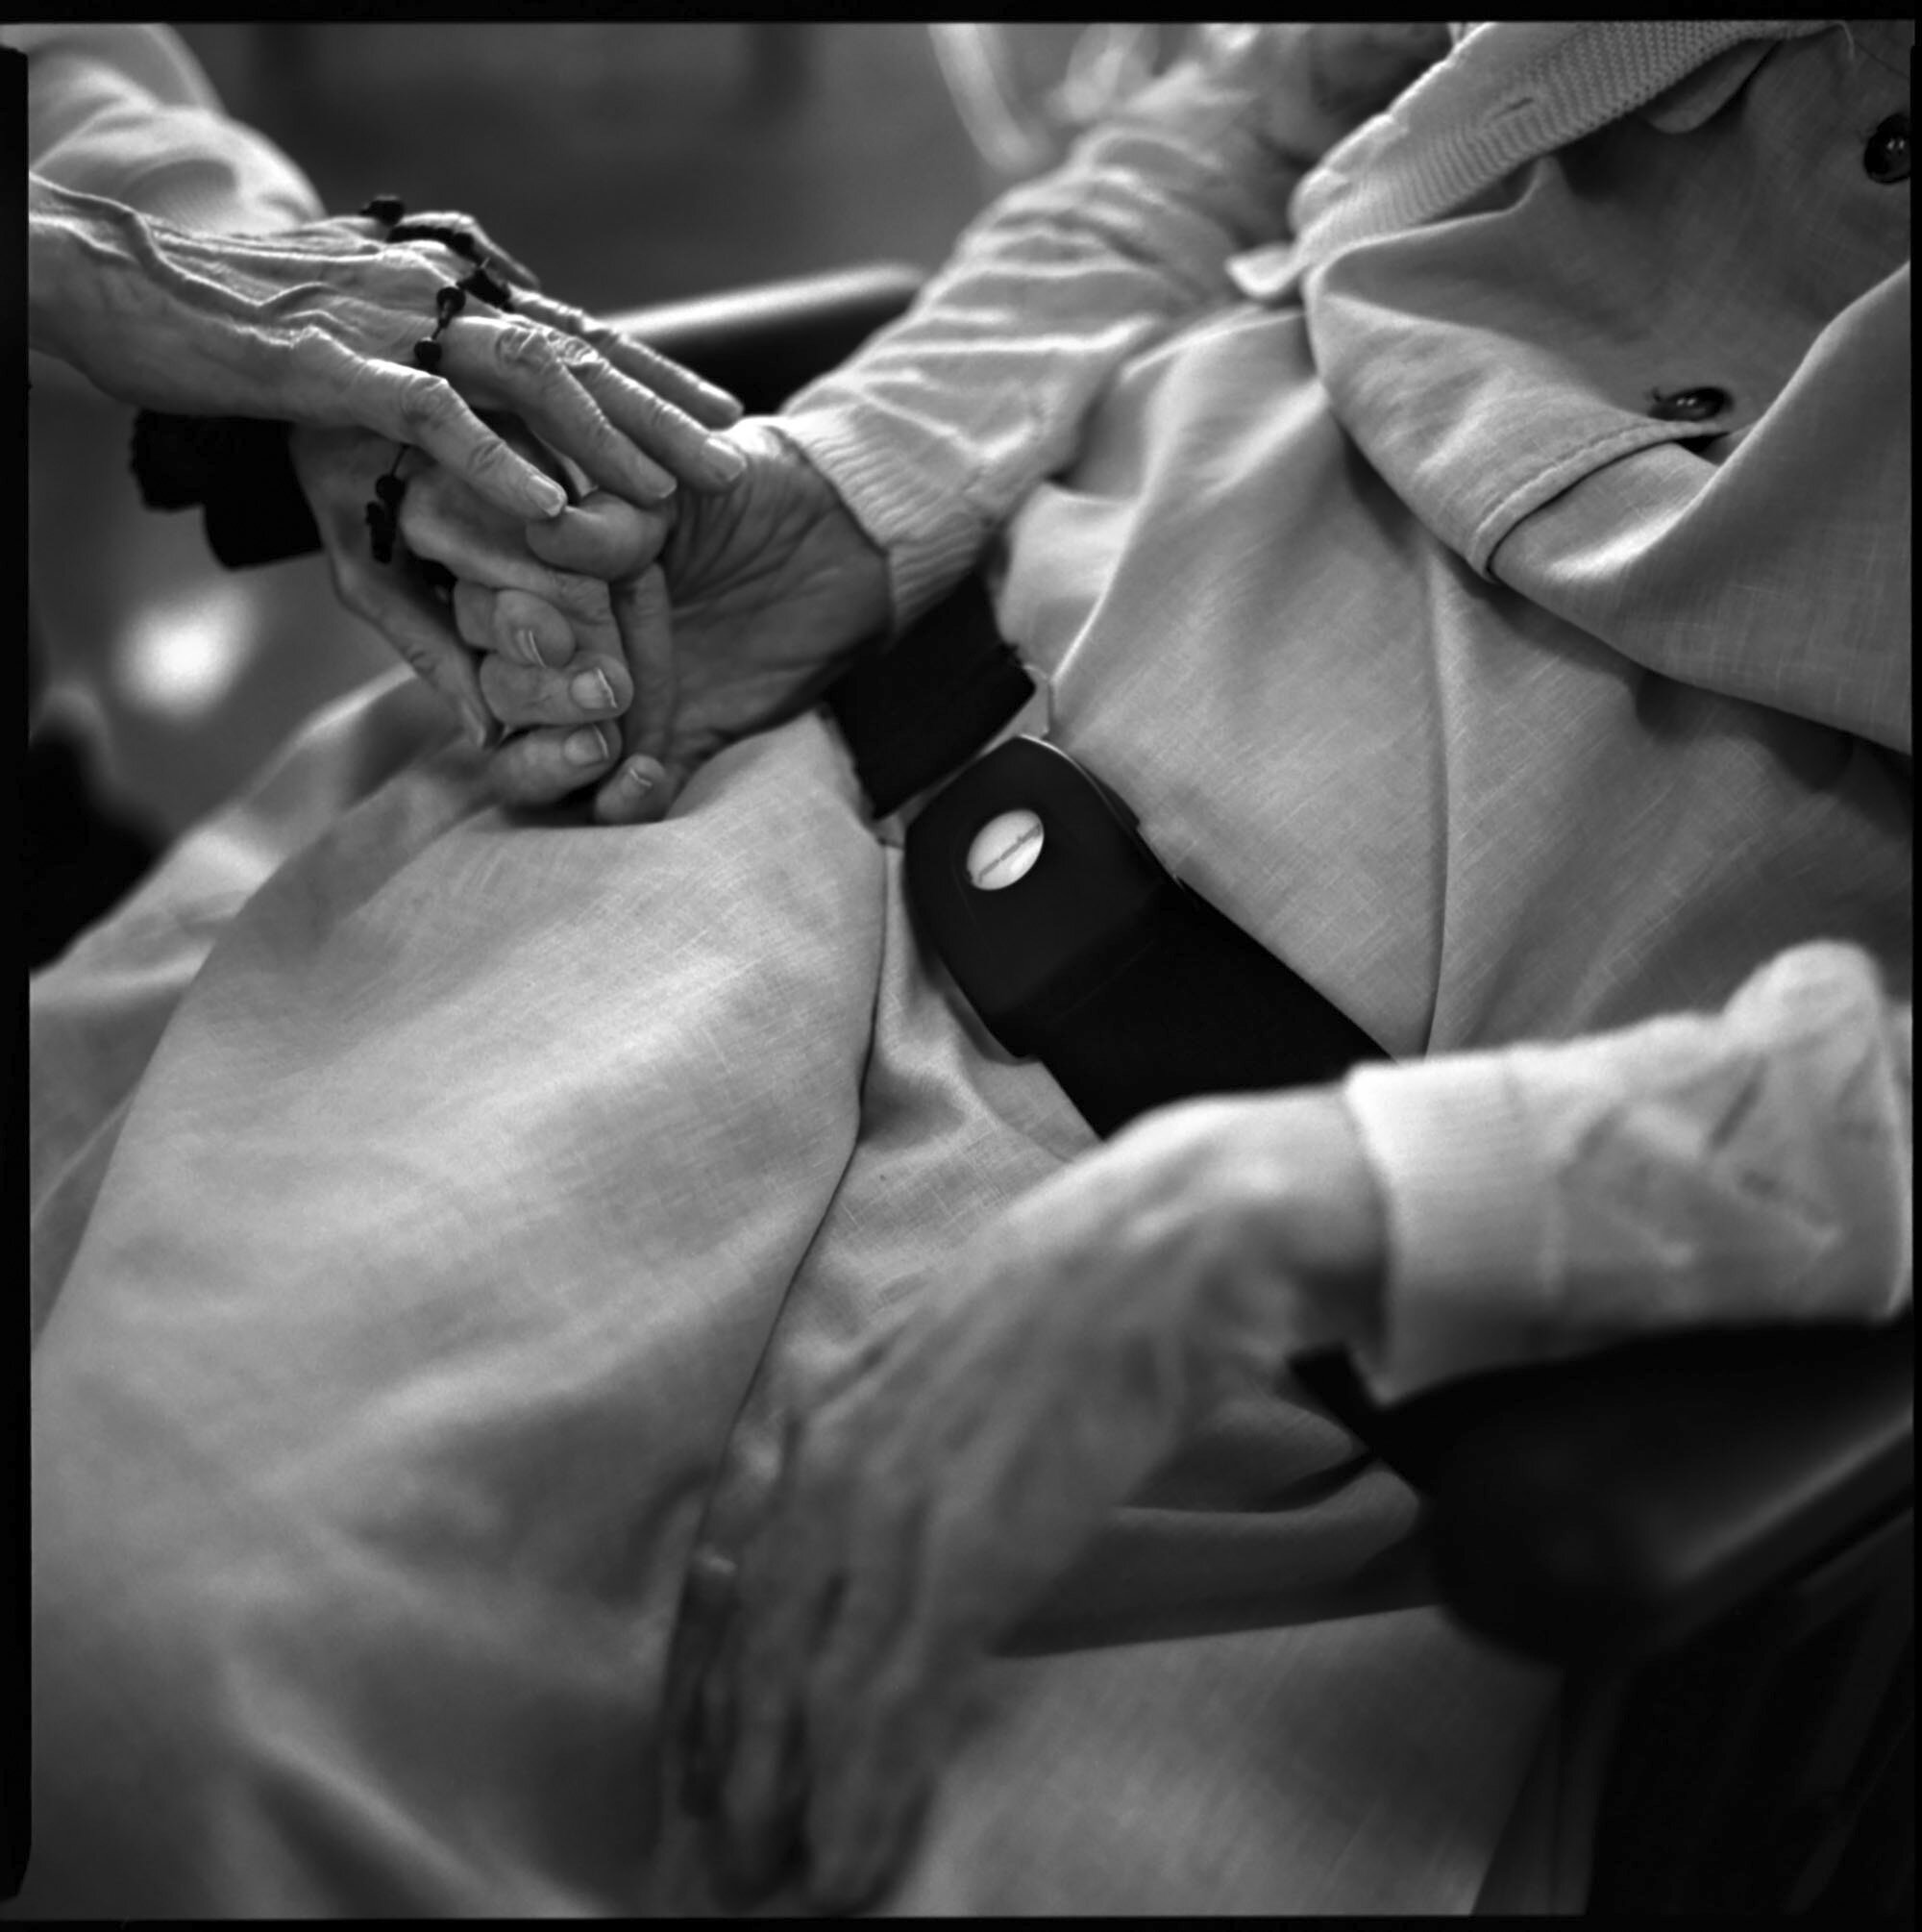  Sr. Noel Devine massages the hands of an elderly Sister with dementia to making her feel comfortable.  